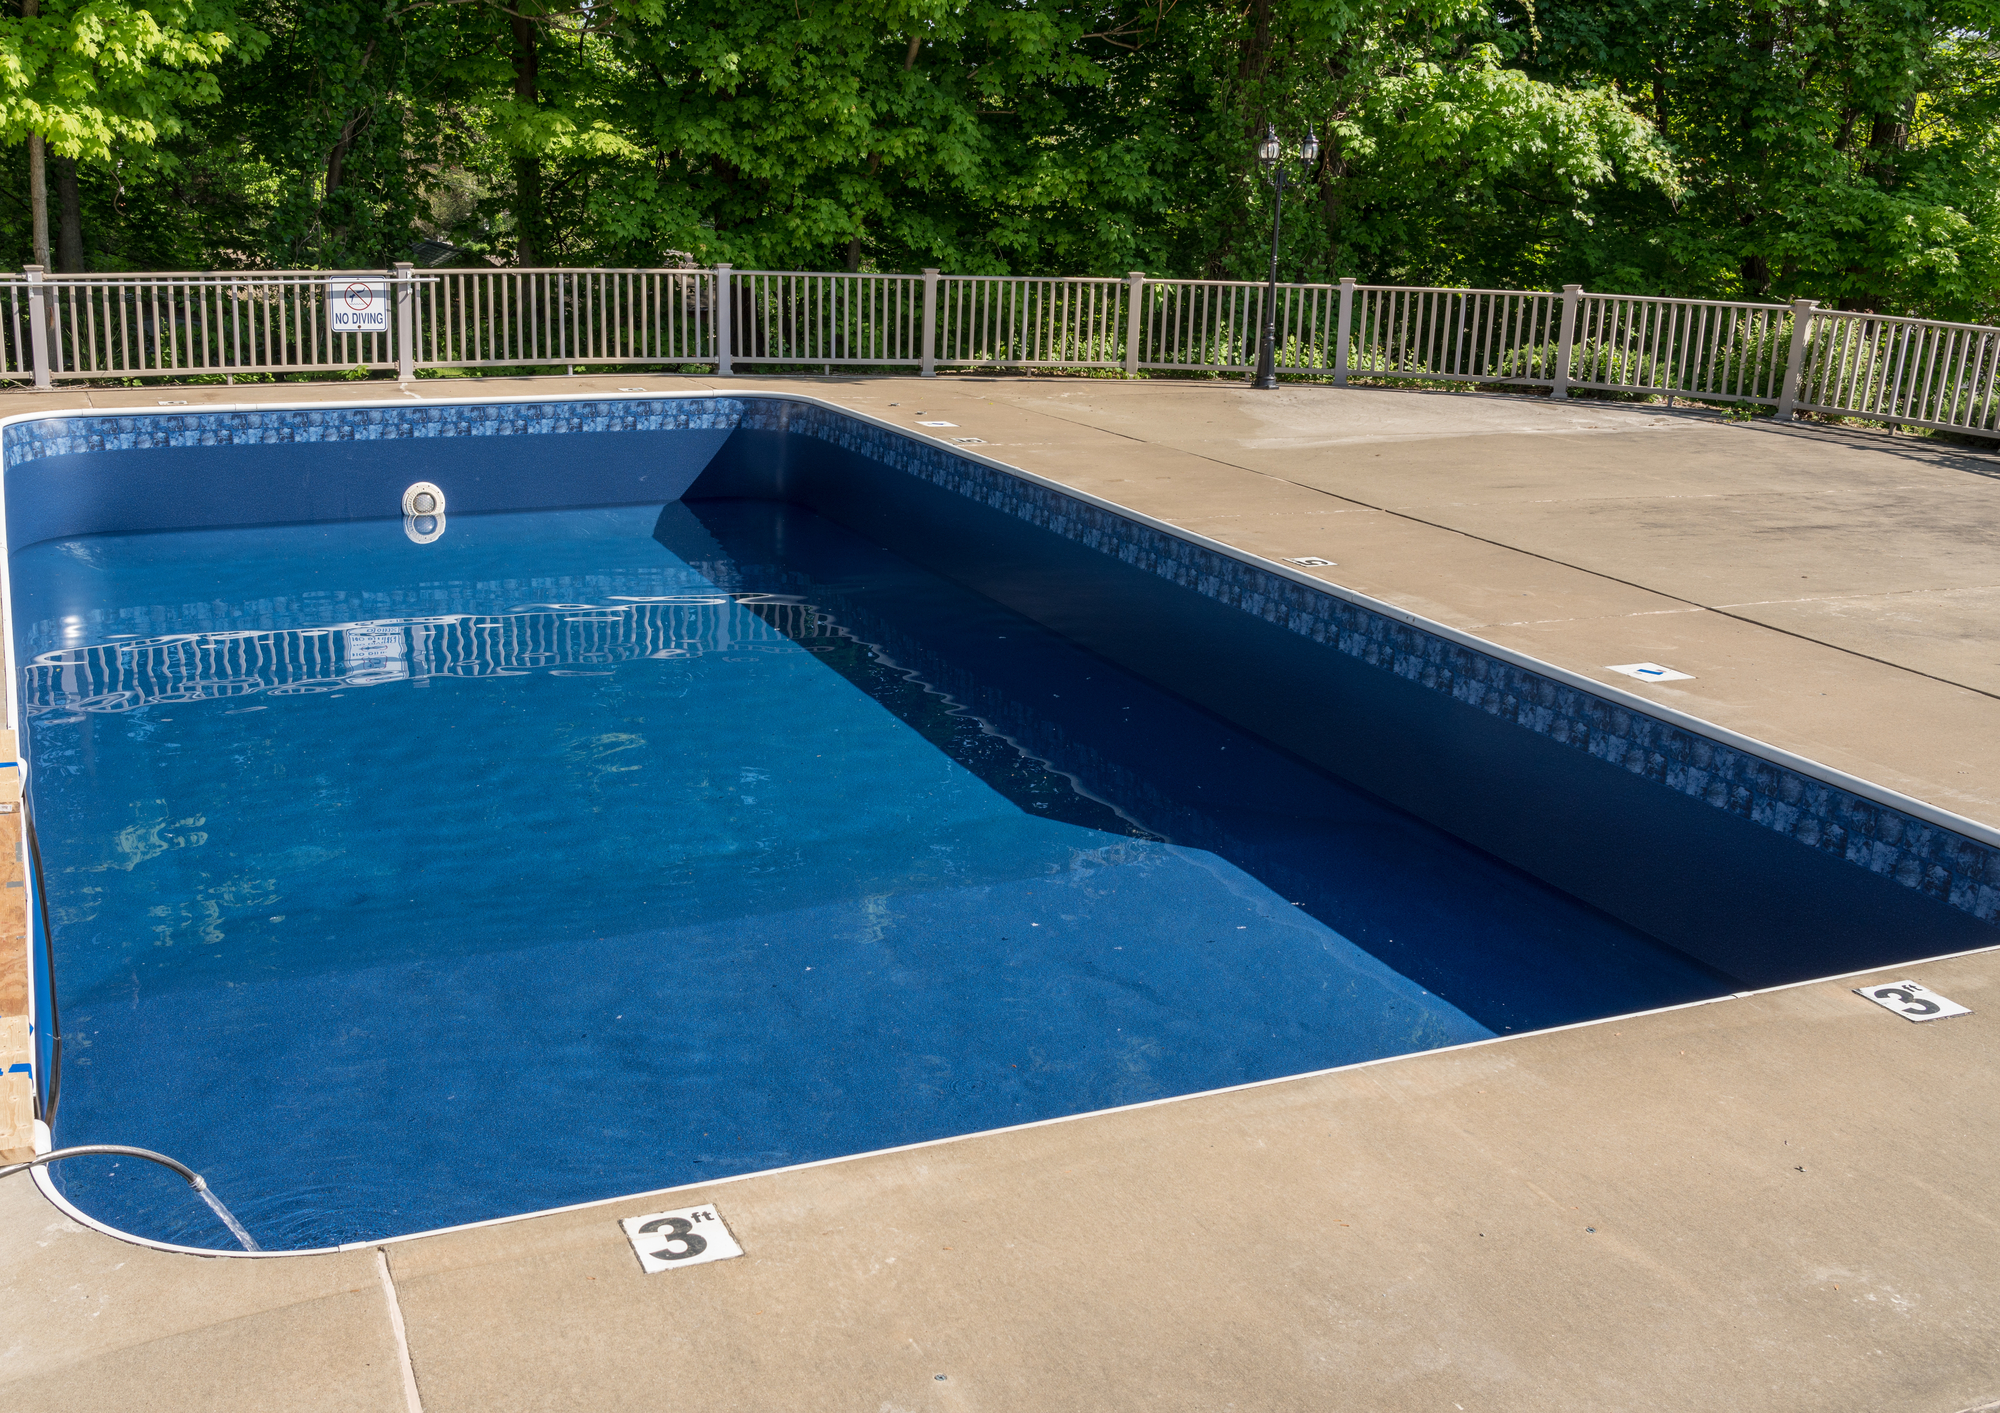 Outdoor swimming pool with clear blue water and depth markers on the pool deck